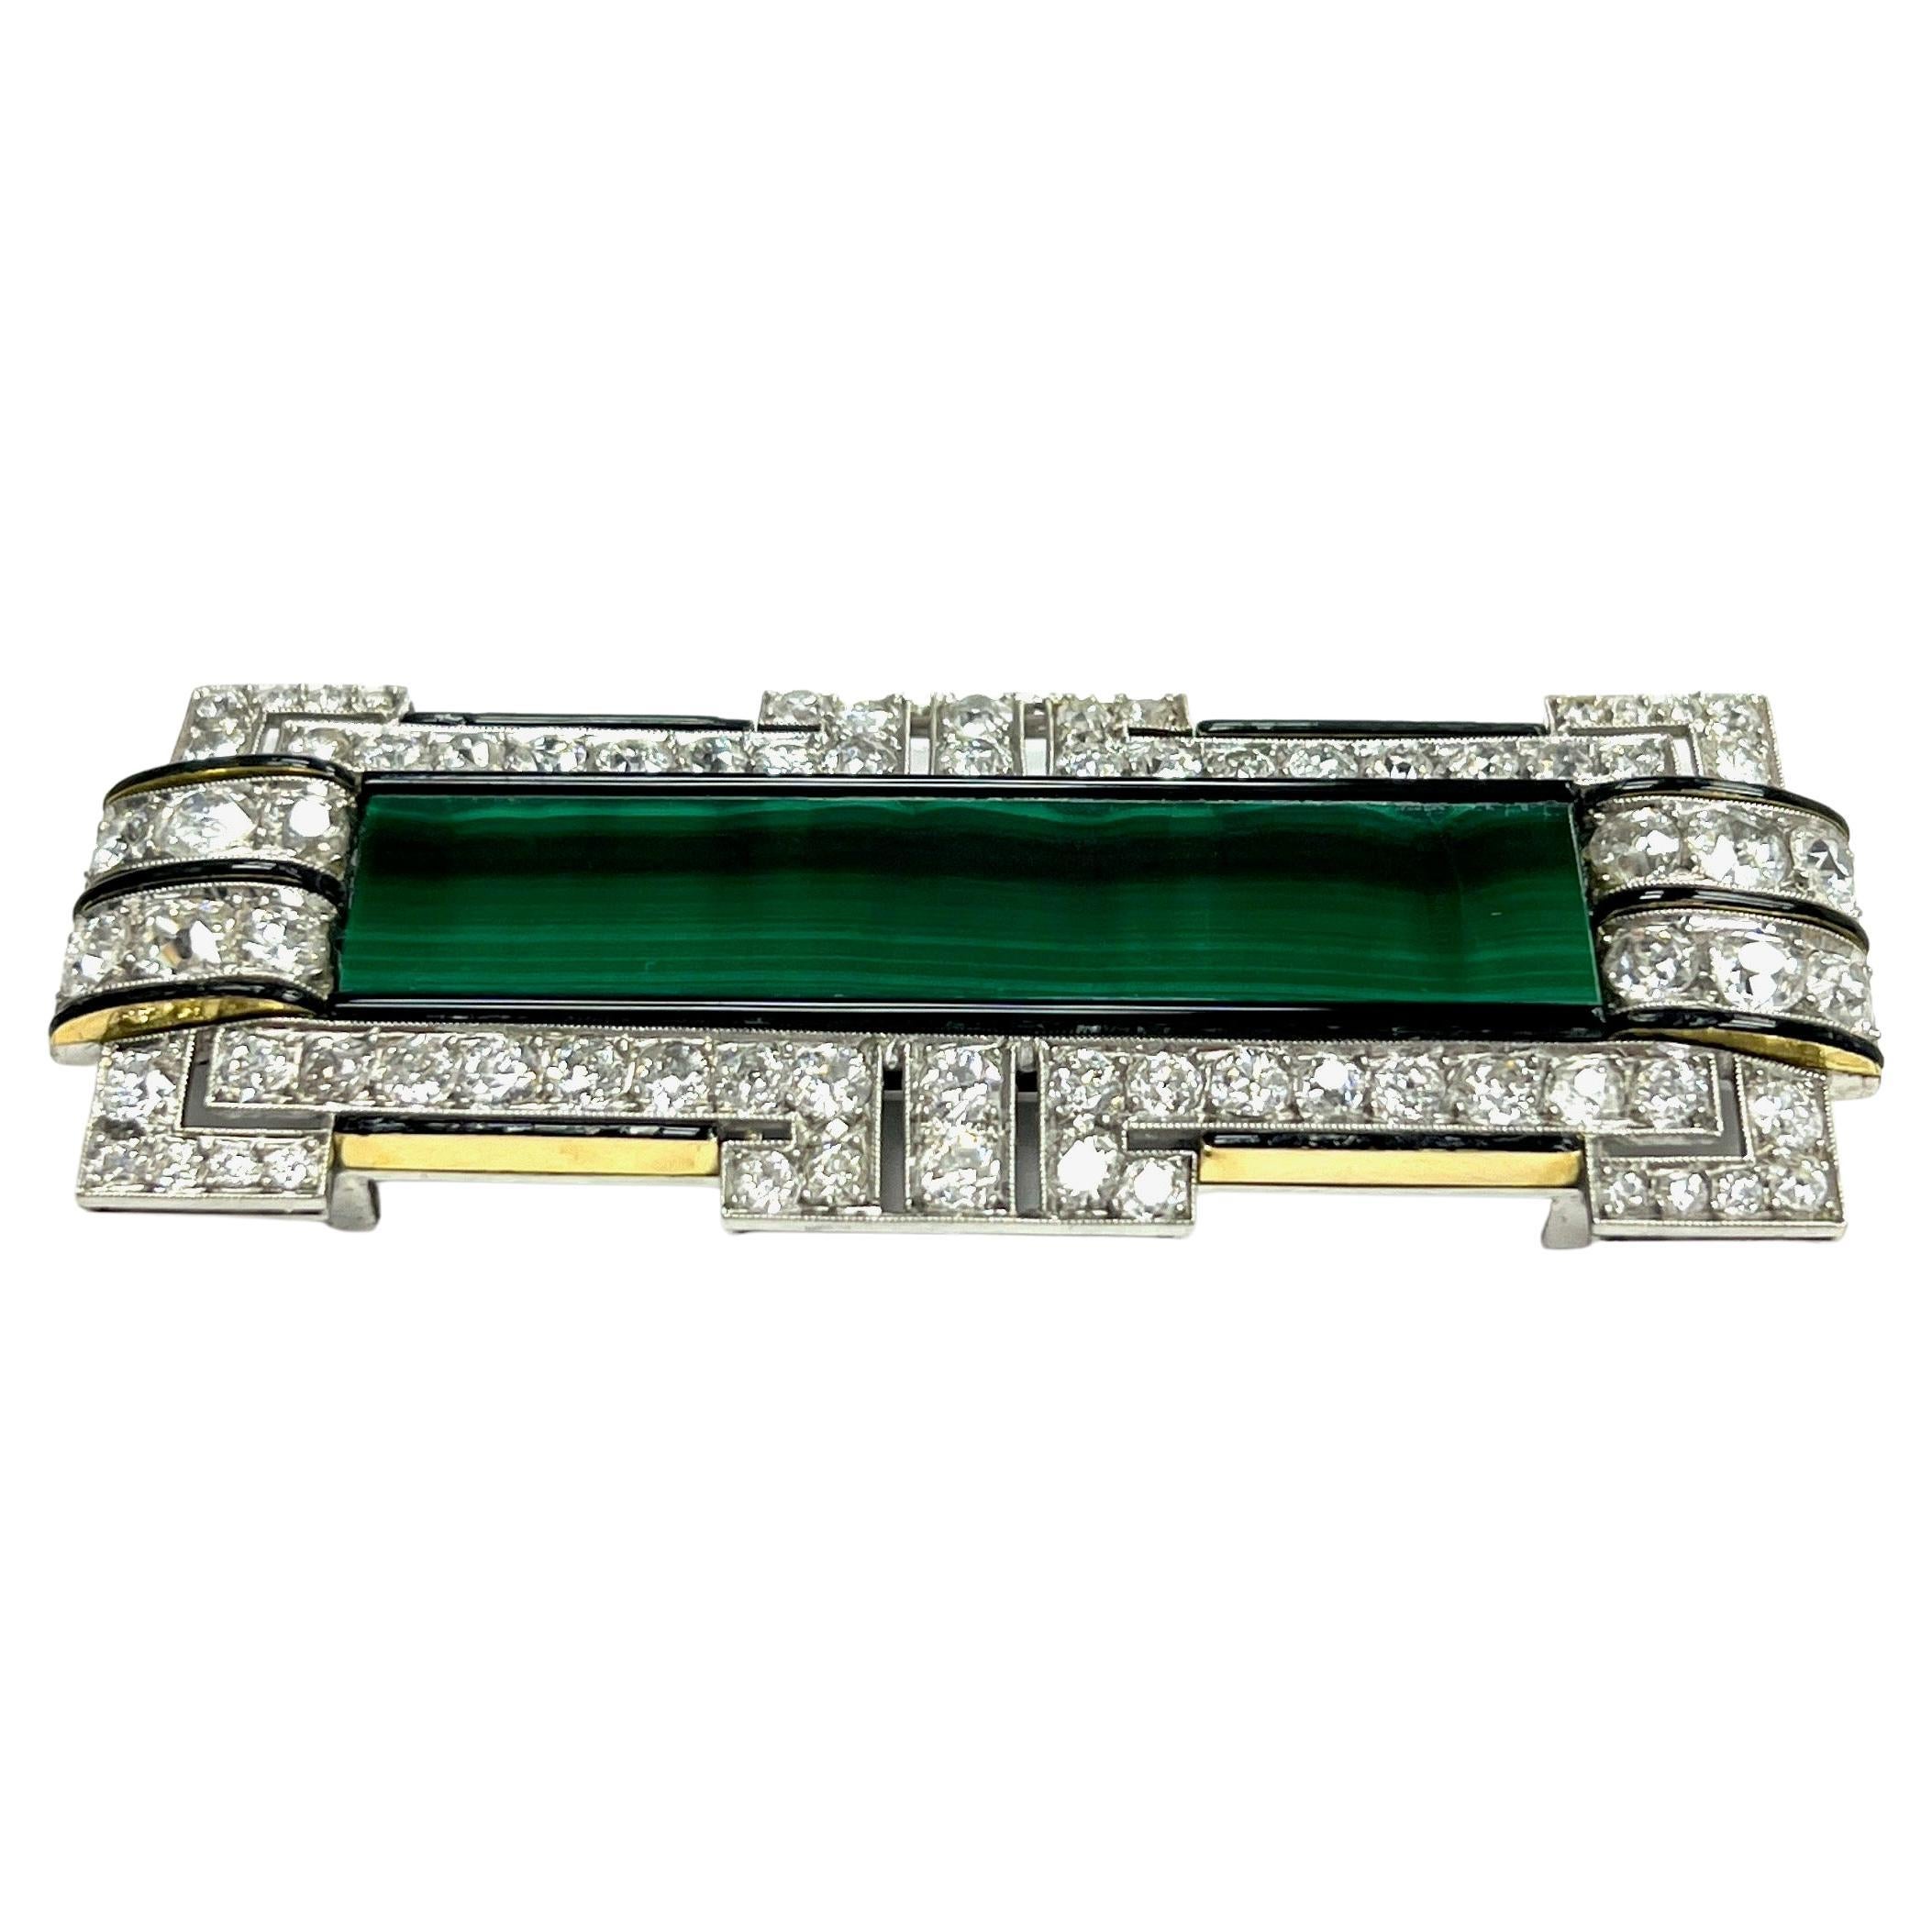 Art Deco Malachite Bar Diamond Black Onyx Pin Brooch

Old miner cut diamonds of approximately 7 carats total, with a rectangular bar of malachite (47 x 11 mm) at the center accented with black onyx; set on white gold

Size: width 2.63 inches, length